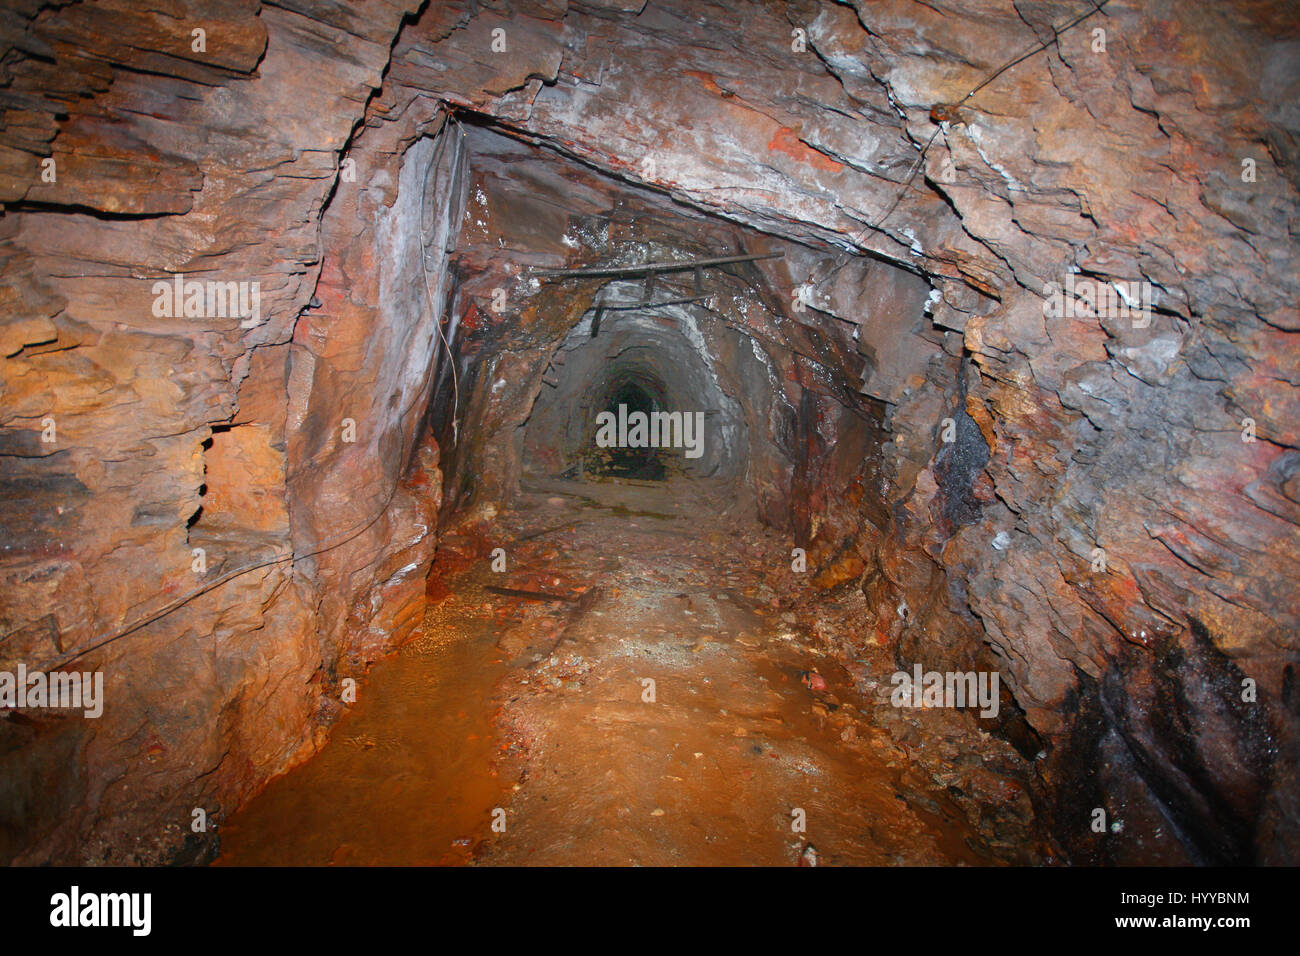 CALLINGTON, CORNWALL, UK: EERIE images reveal the Cornish mining tunnel that was once used to test explosives and research the potential impact of nuclear tests during the Cold War under the code name Operation Orpheus. The haunting pictures show inside the 2,180-foot tunnel where rusting sleepers and collapsing structures remain. Other shots, look down into an adit (entrance) and show the unsuspecting exterior of the mine where a metal gate has been closed across. The spectacular images were taken at the Excelsior Tunnel, Kit Hill, Callington, Cornwall by editor, Nat W (46) from London. To ta Stock Photo